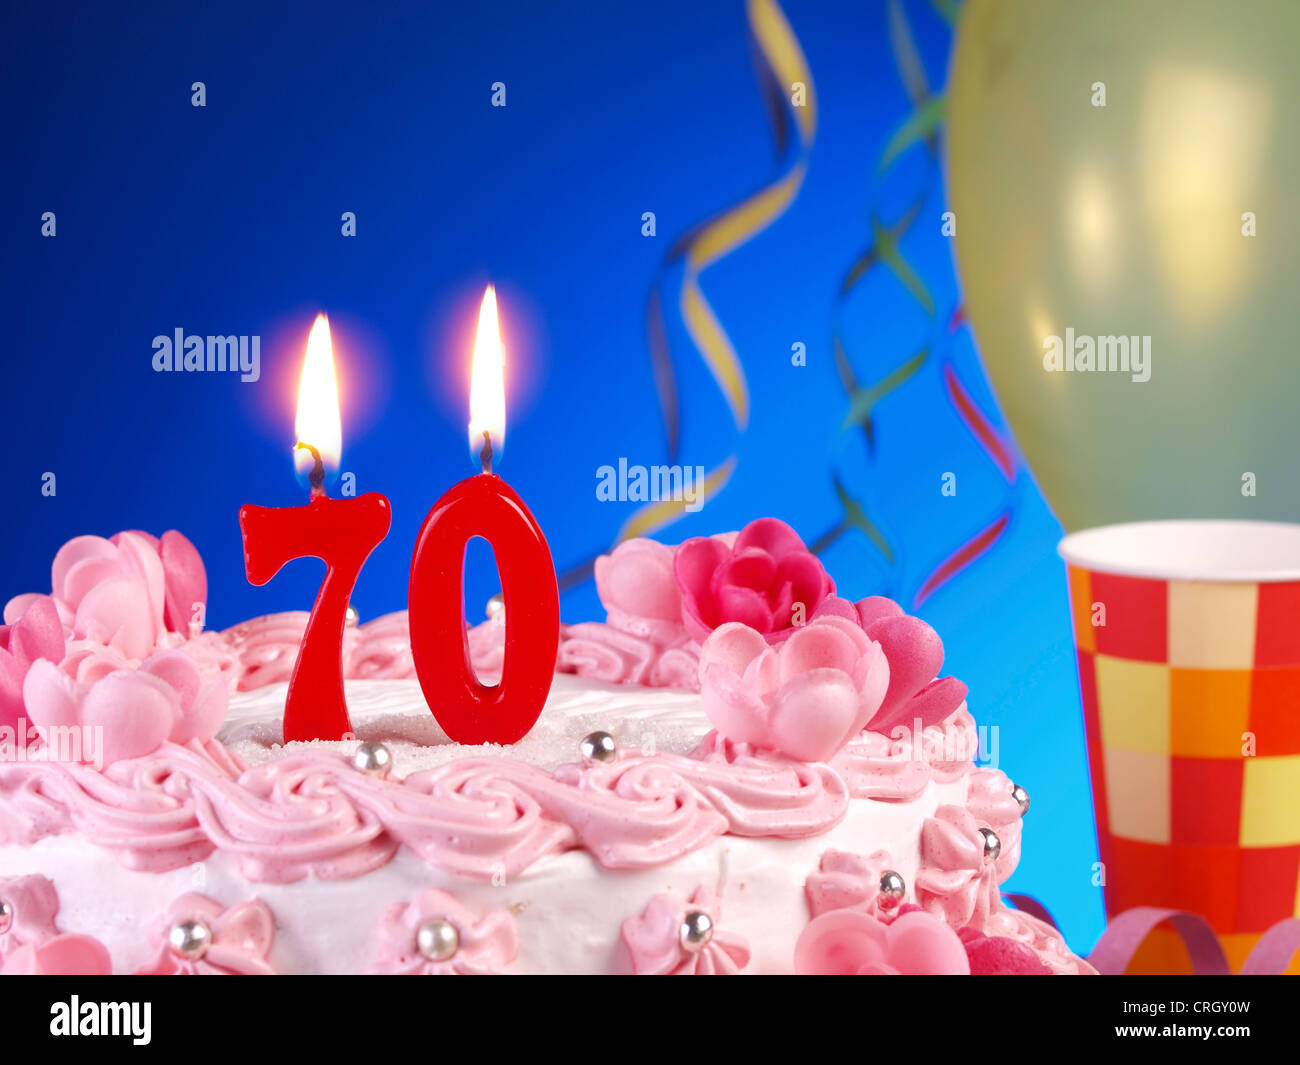 Birthday-anniversary cake with candles showing Nr. 70 Stock Photo